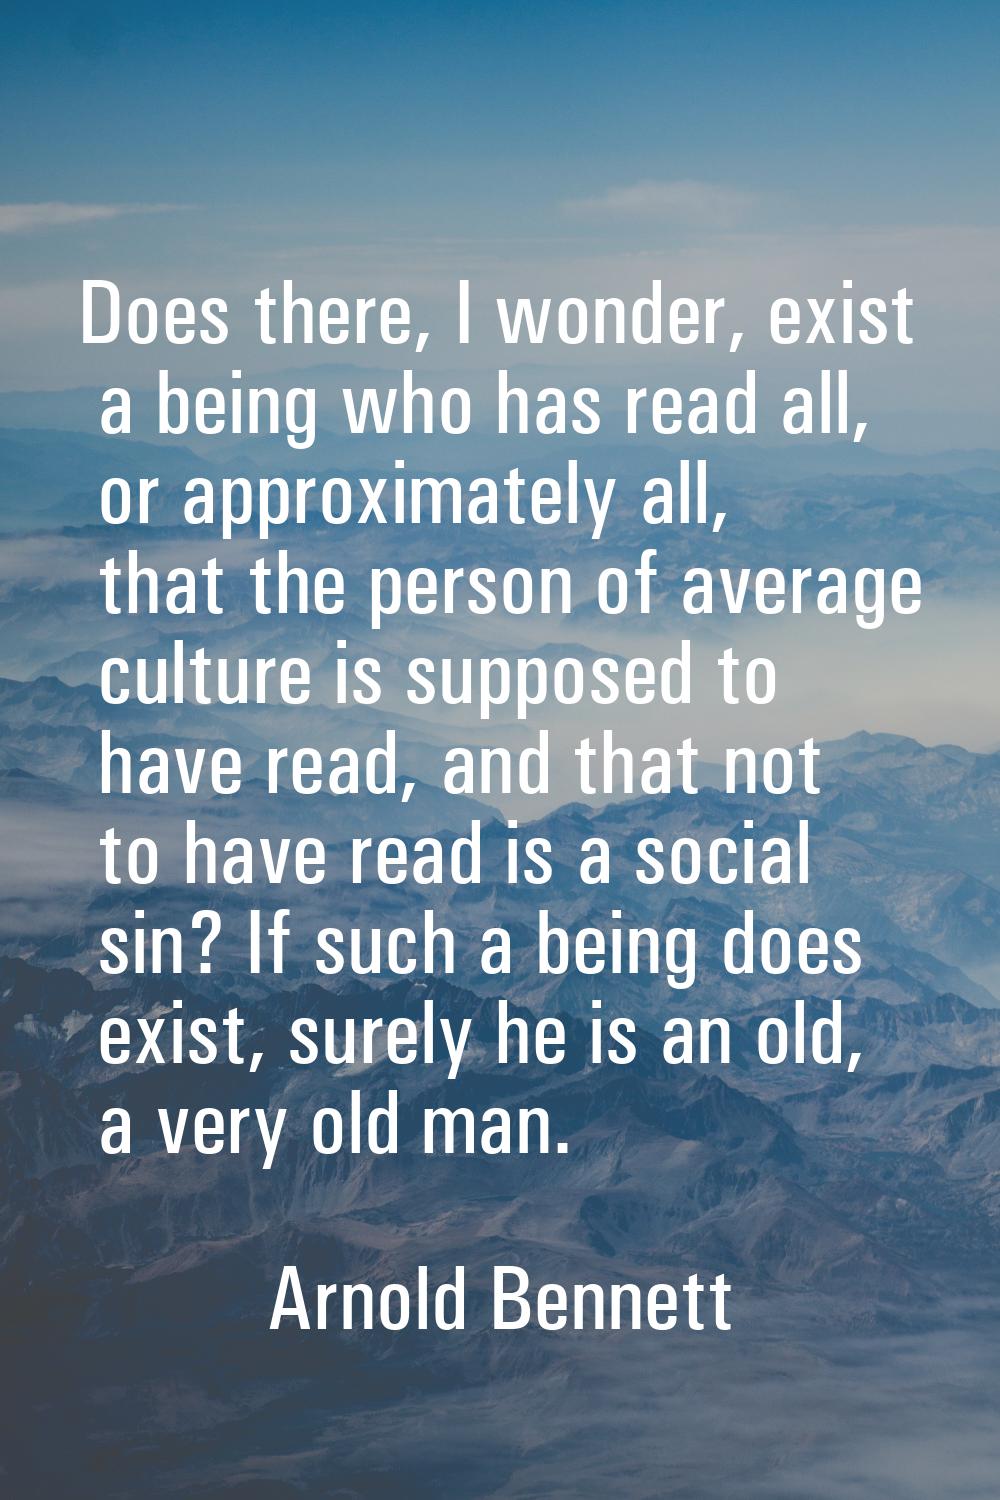 Does there, I wonder, exist a being who has read all, or approximately all, that the person of aver